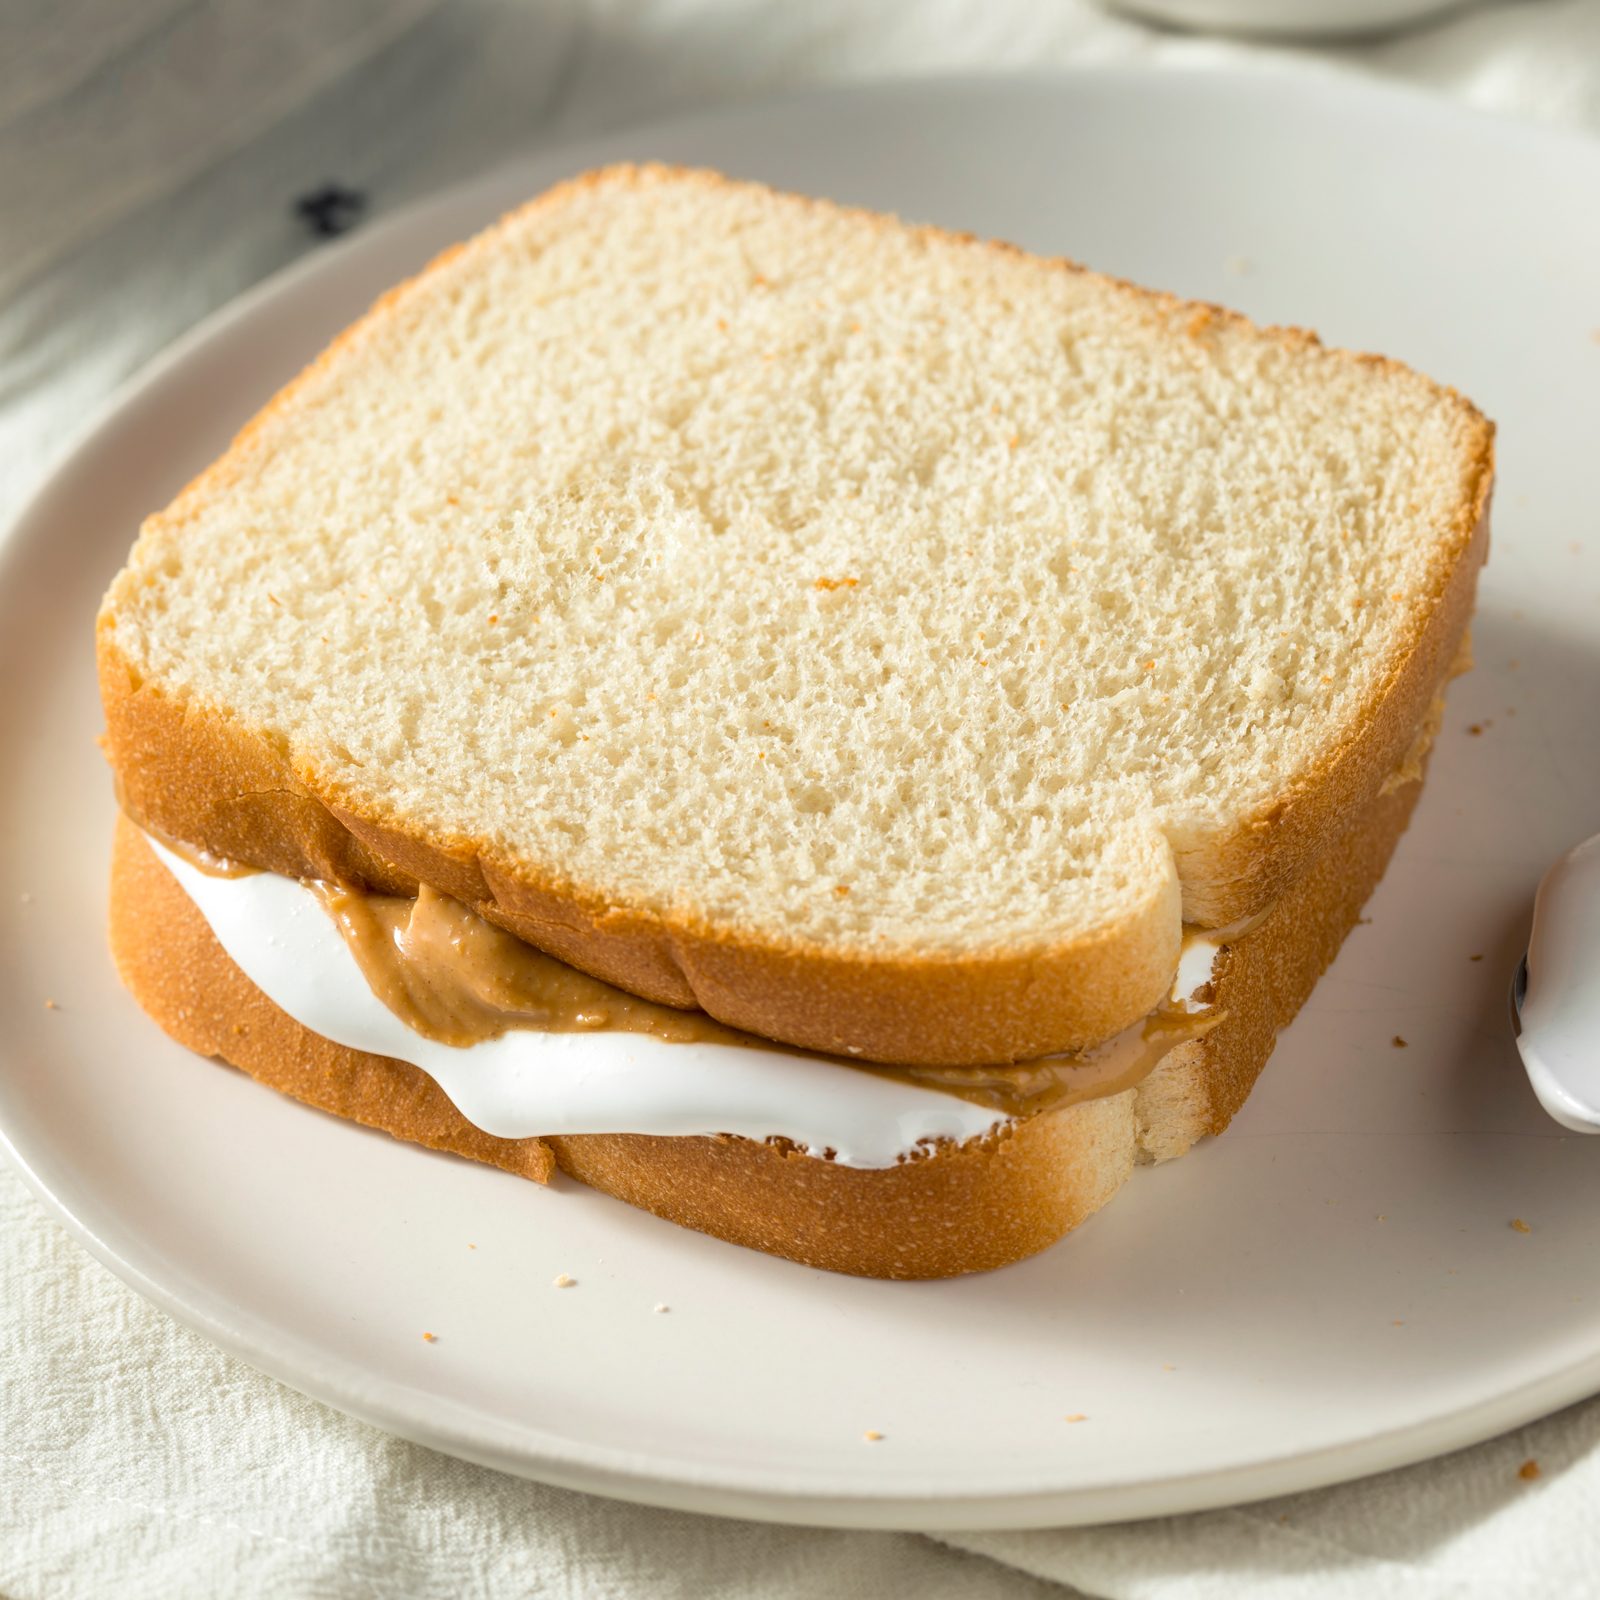 peanut butter and marshmallow fluff sandwich on sliced white bread